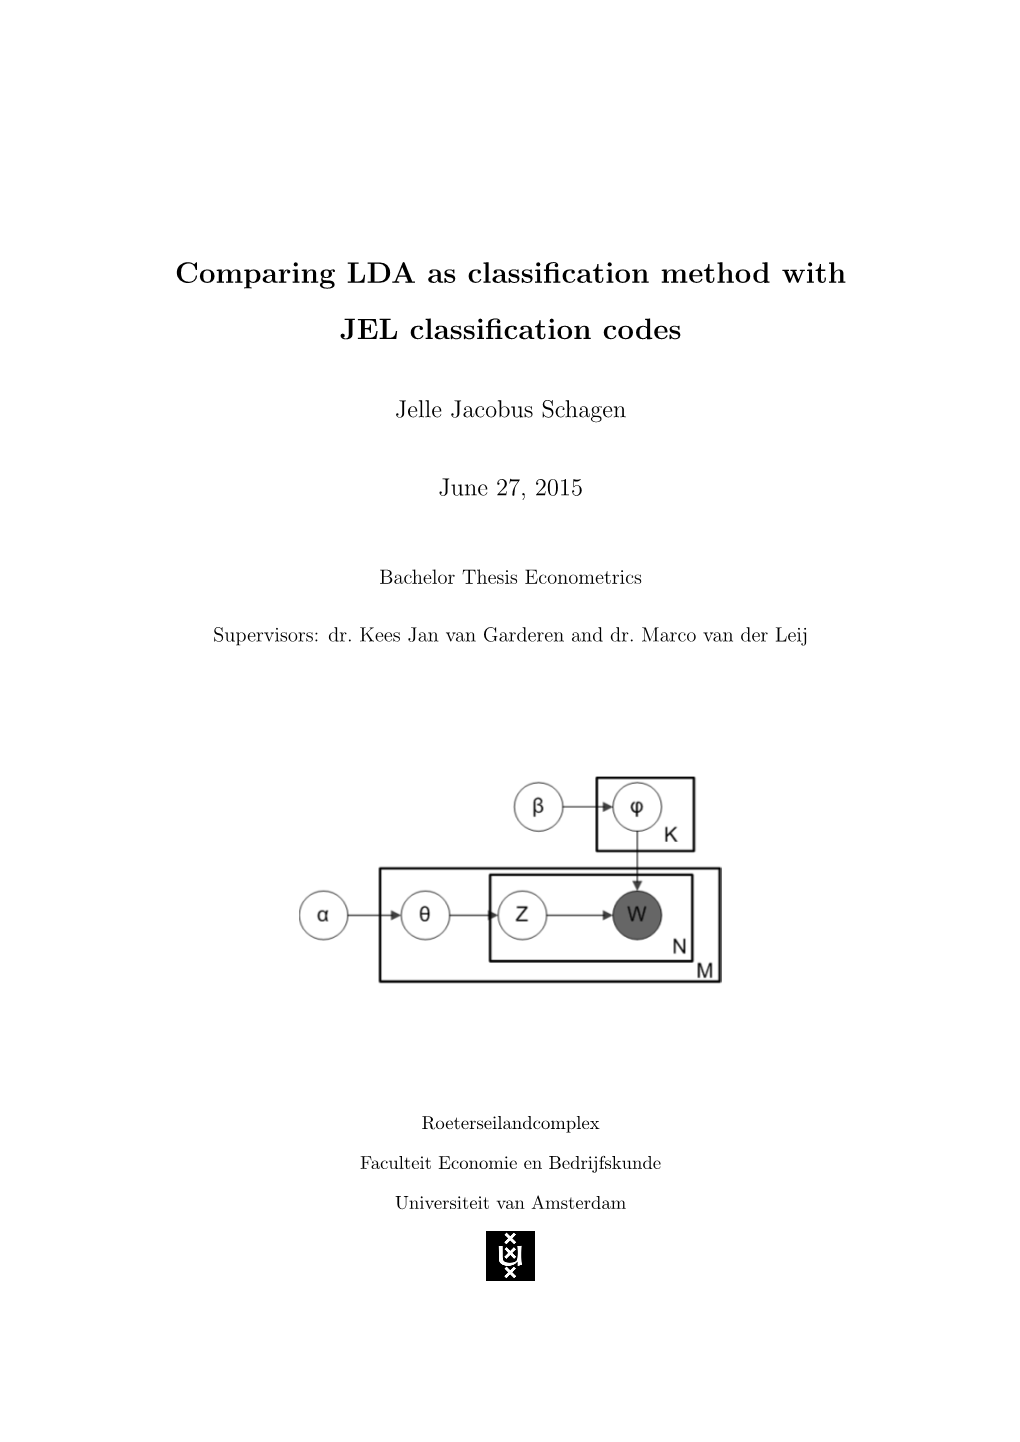 Comparing LDA As Classification Method with JEL Classification Codes